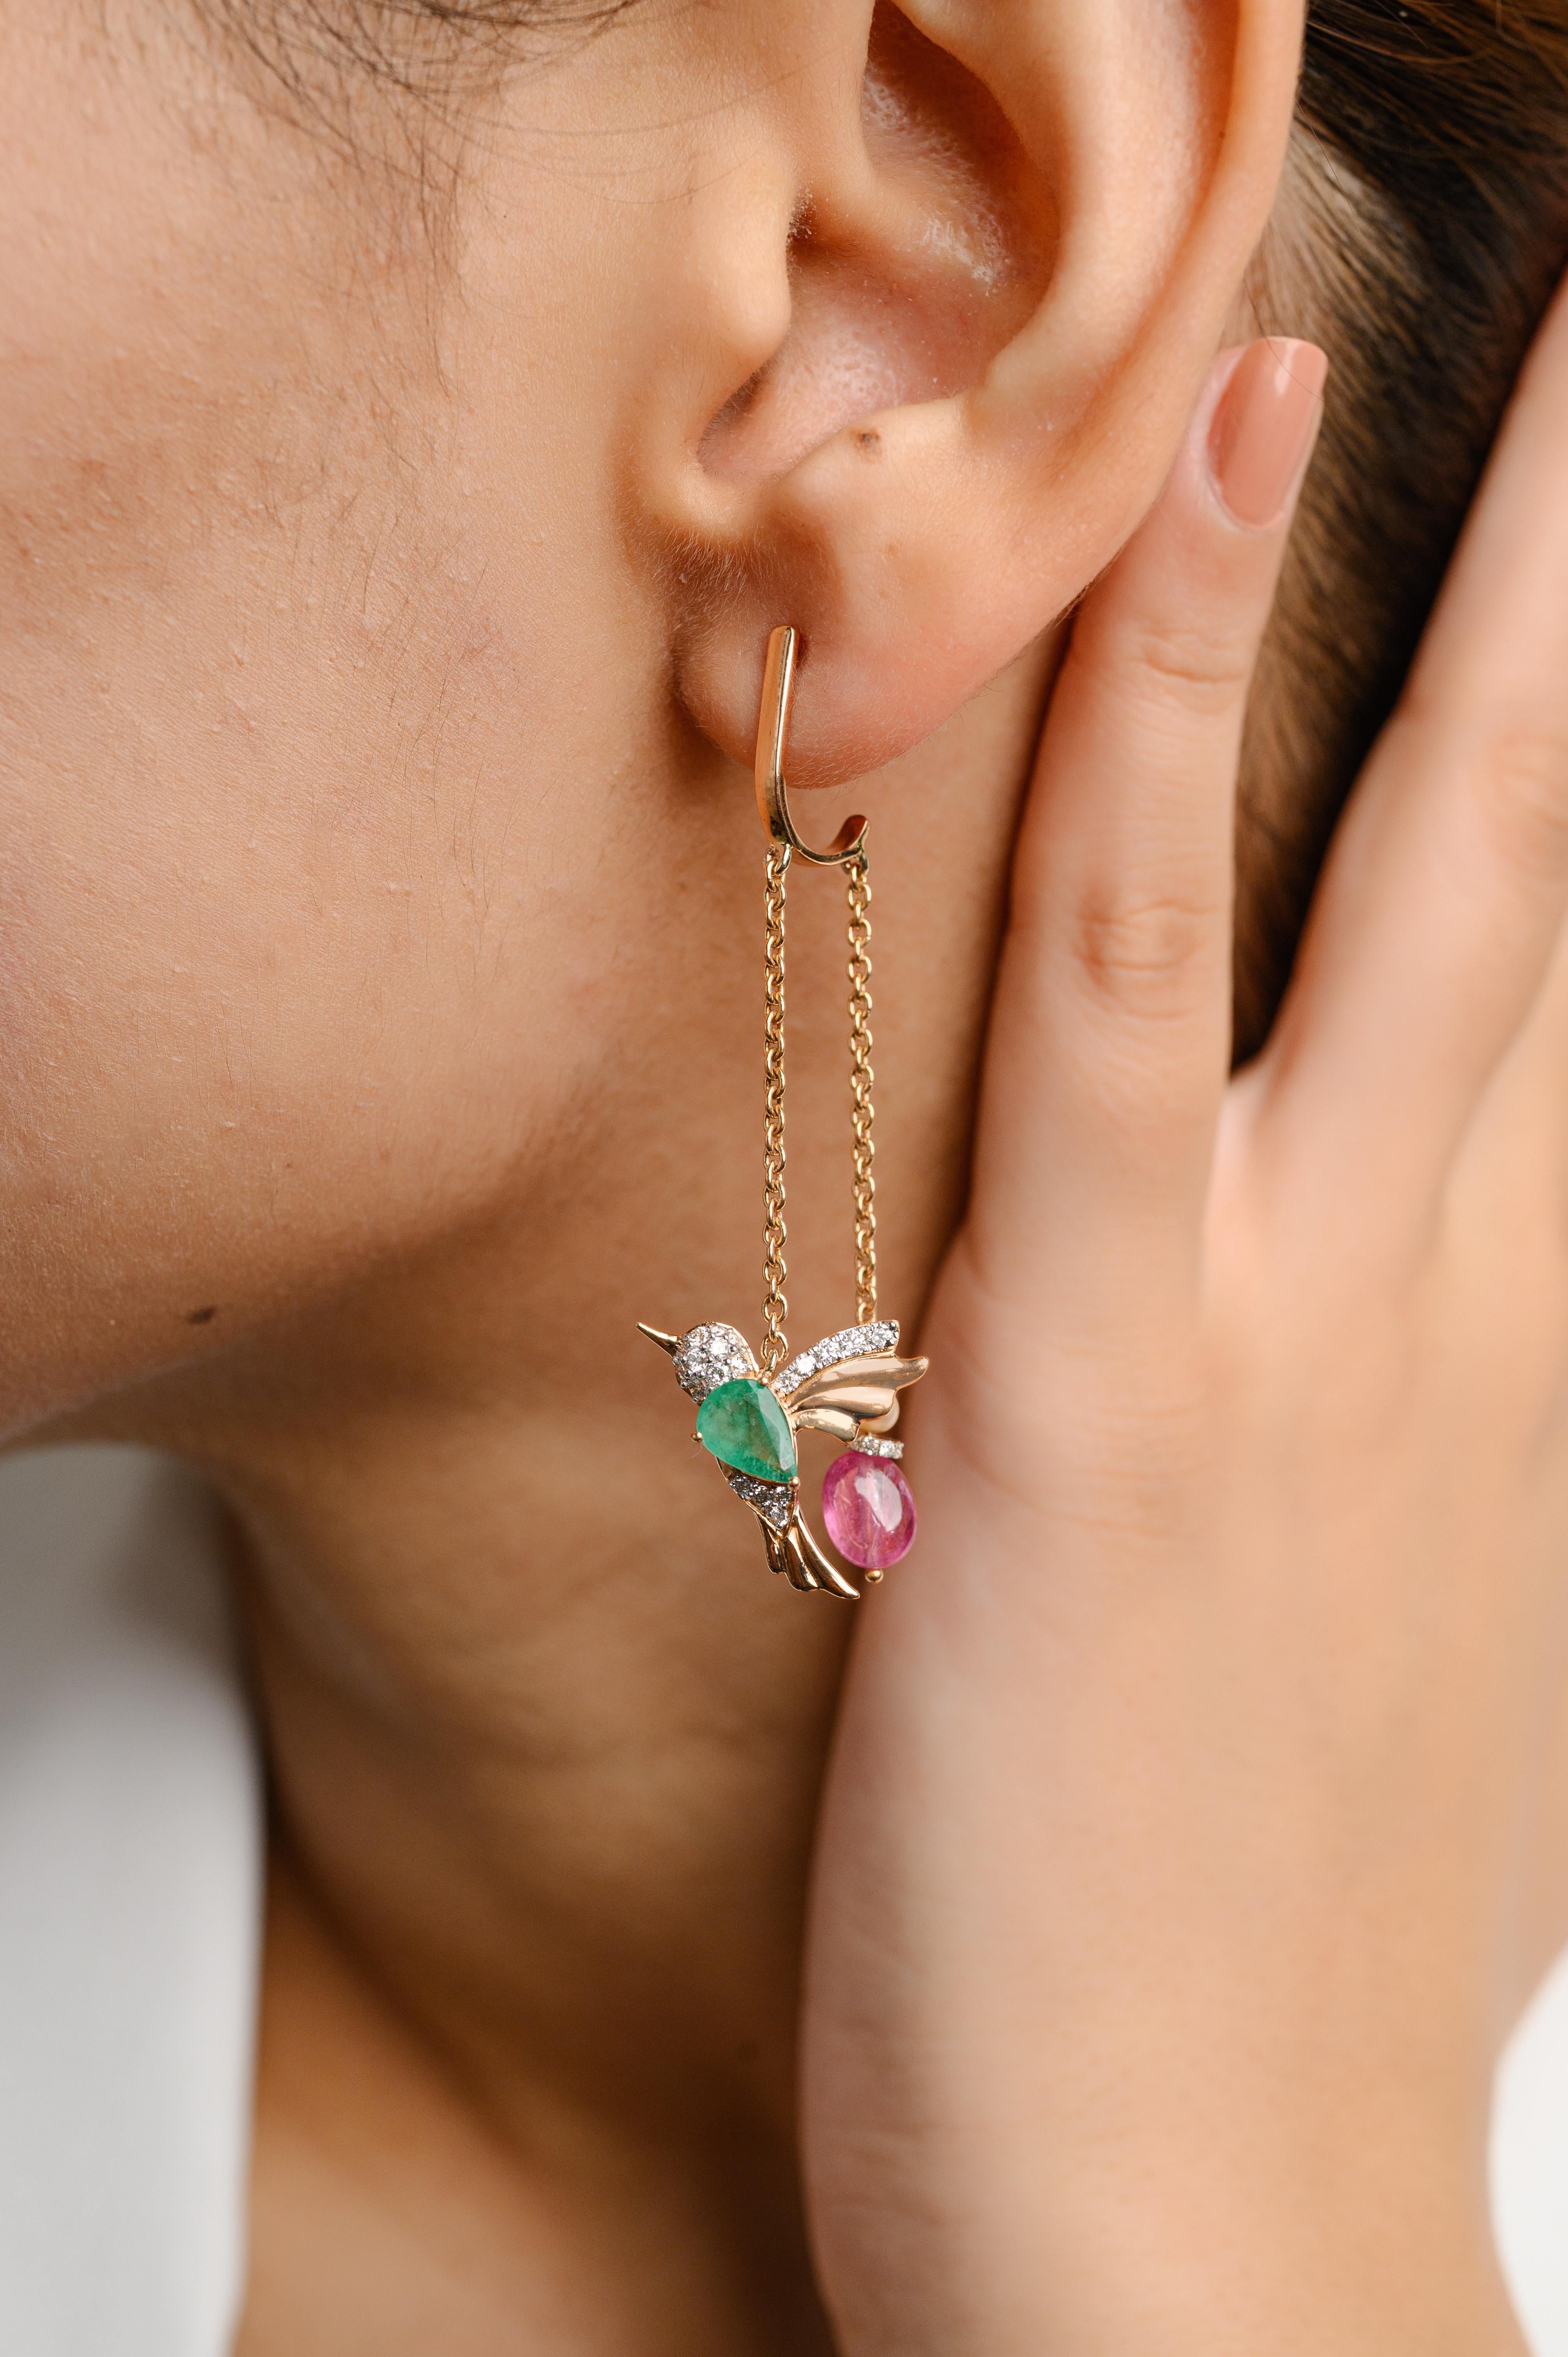 Flying Hummingbird Emerald and Ruby Chain Earrings in 18K Gold with Diamonds to make a statement with your look. These earrings create a sparkling, luxurious look featuring mix cut gemstone.
Emerald enhances the intellectual capacity and ruby